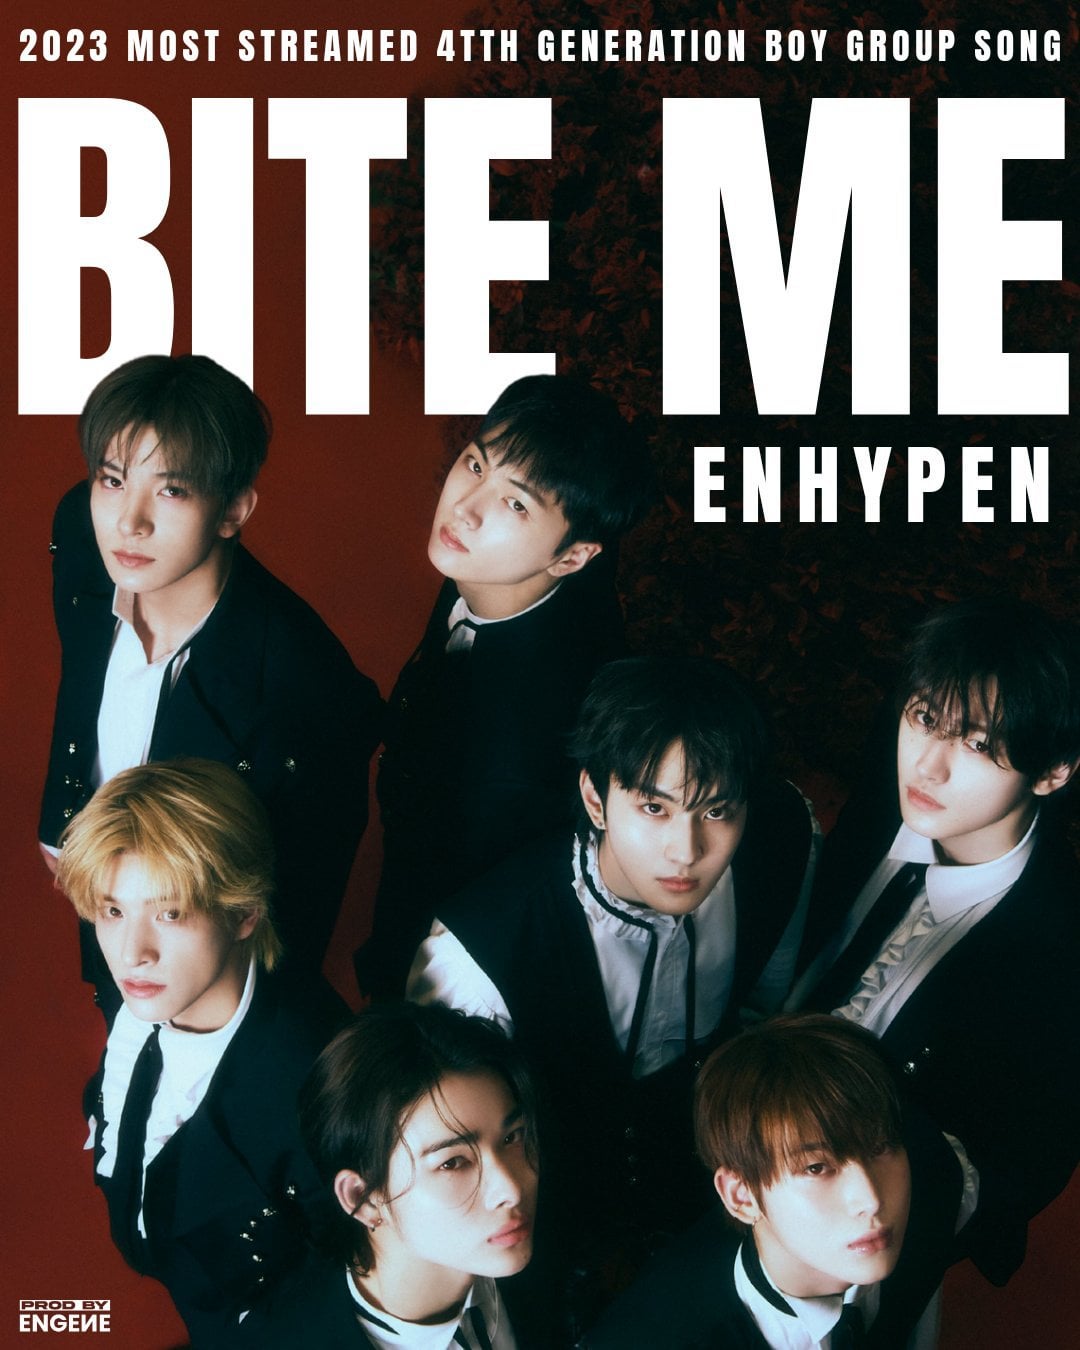 ‘Bite Me’ by ENHYPEN has taken the crown for the Most Streamed 4th Generation Boy Group Song on Spotify in 2023, surpassing TXT's ‘Sugar Rush Ride’!